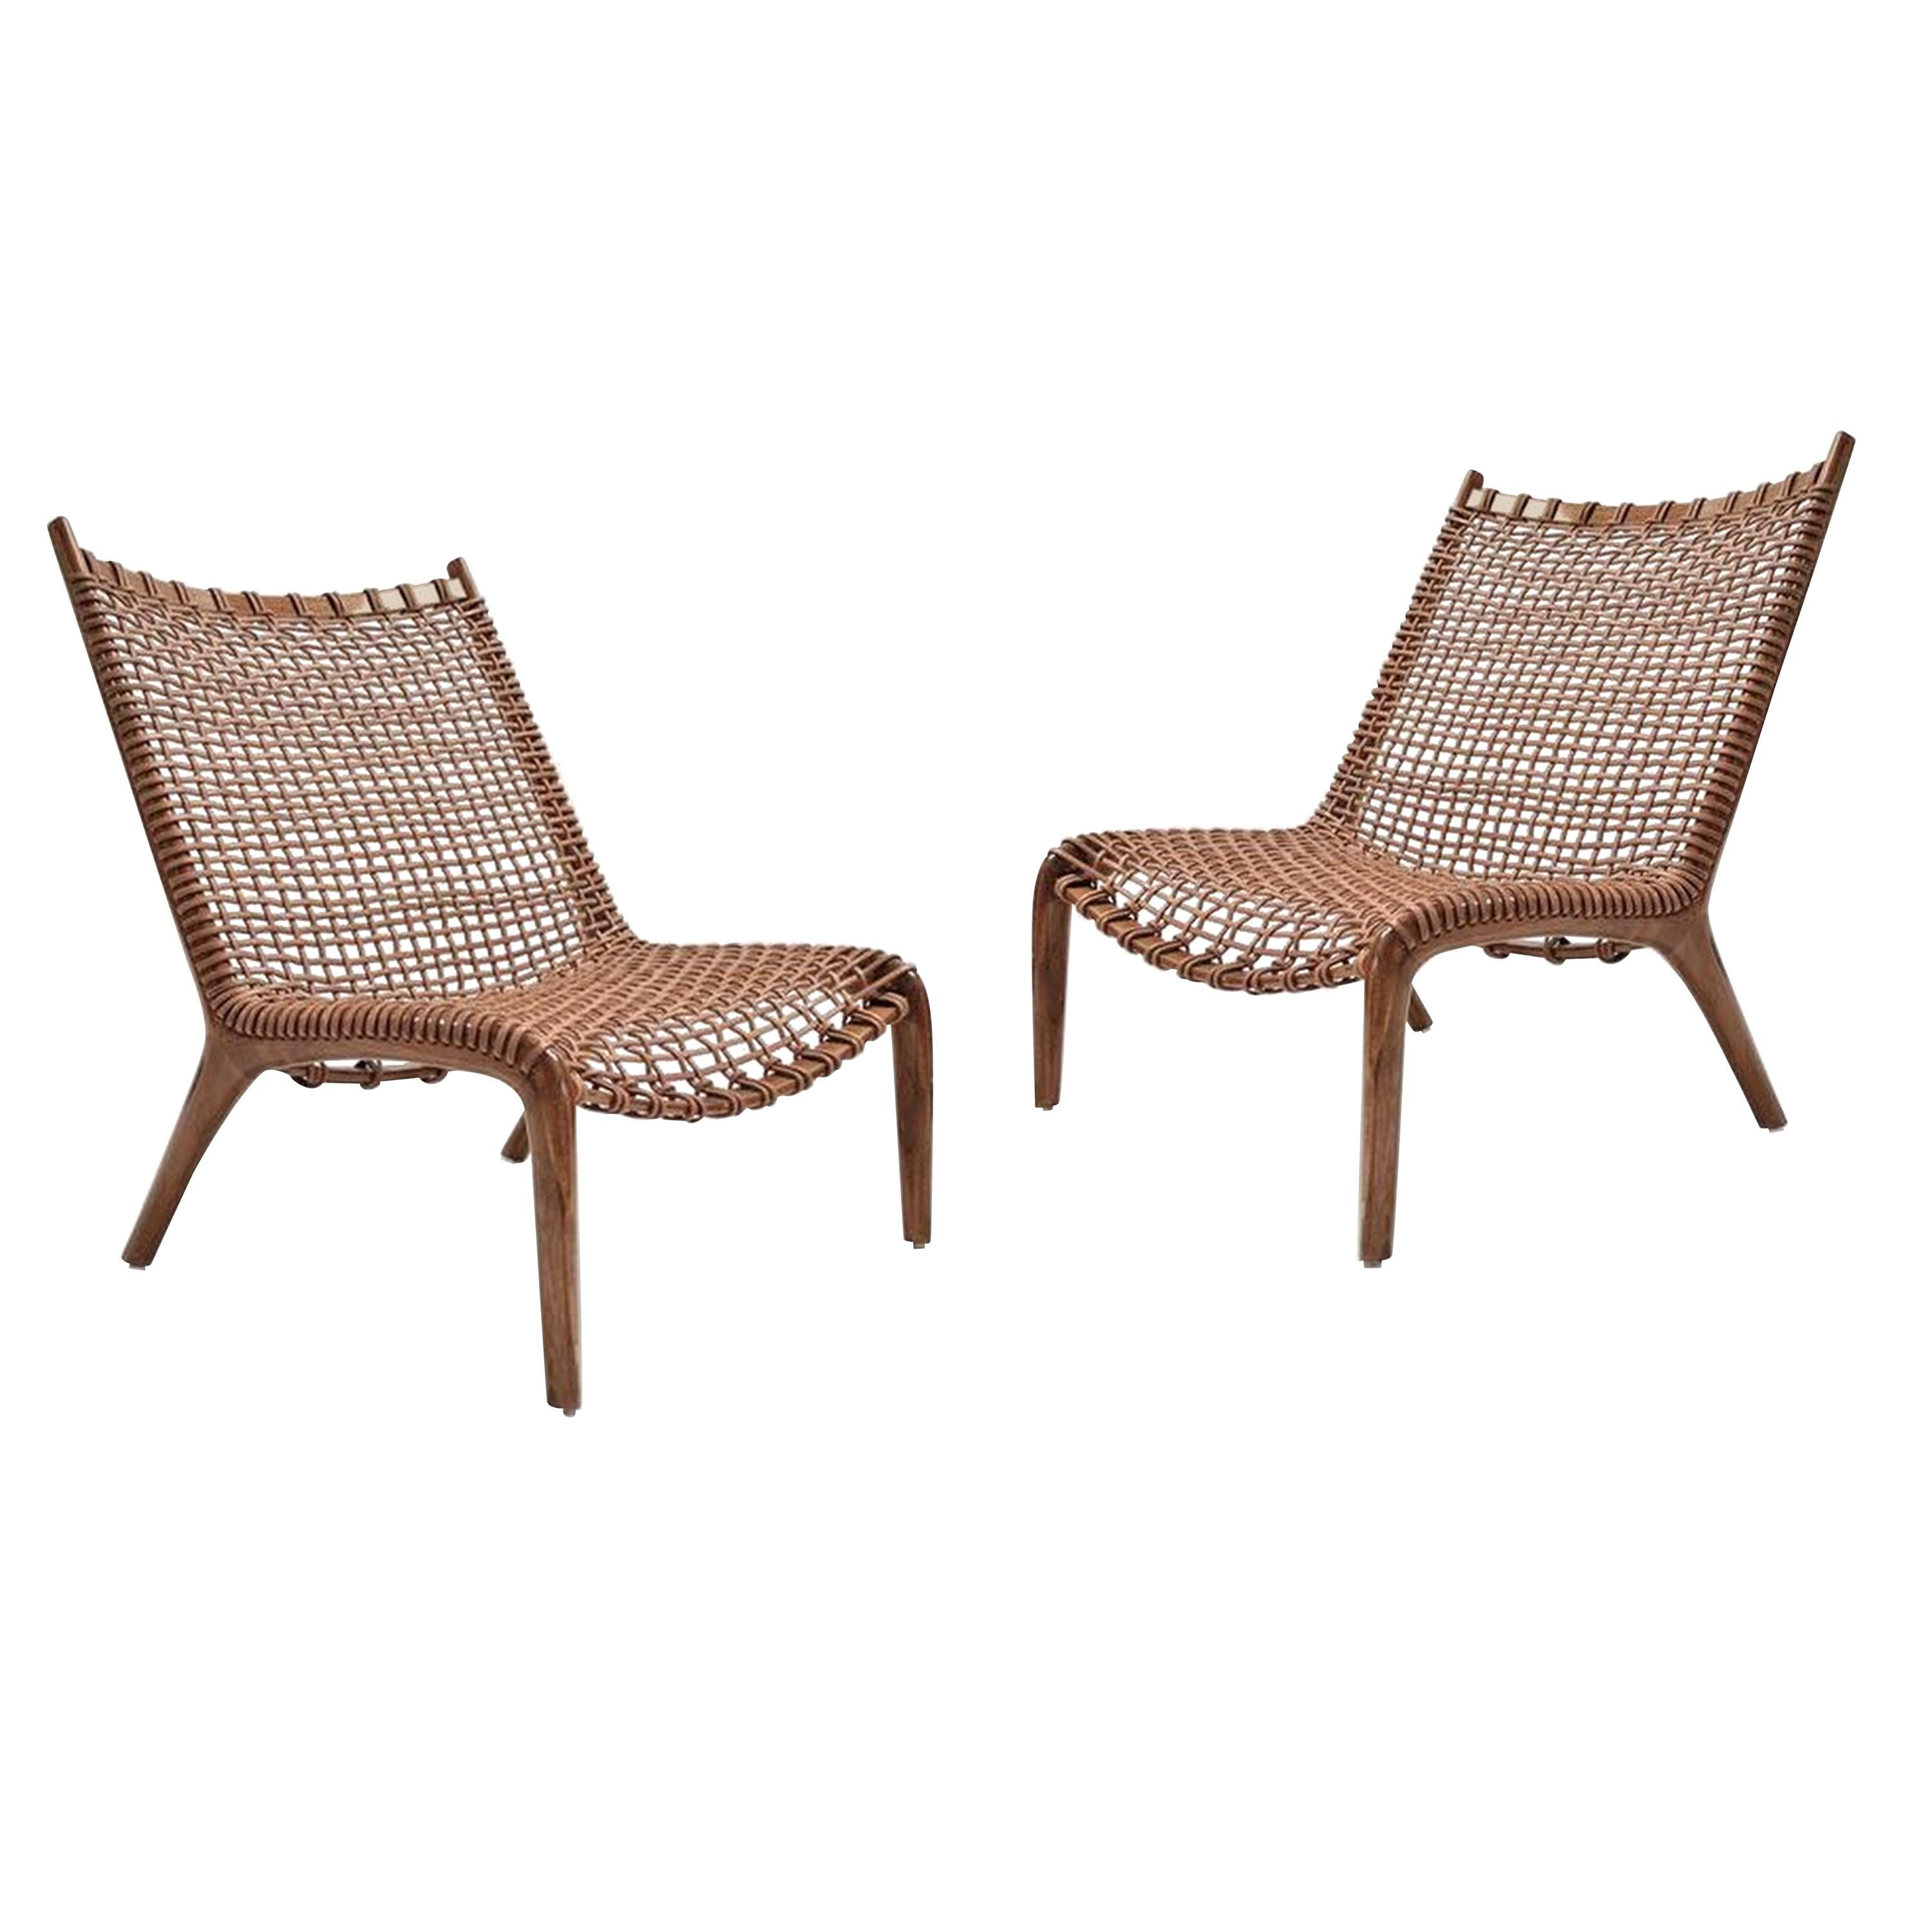 Pair of Contemporary Teak and Leather Chairs, 2018